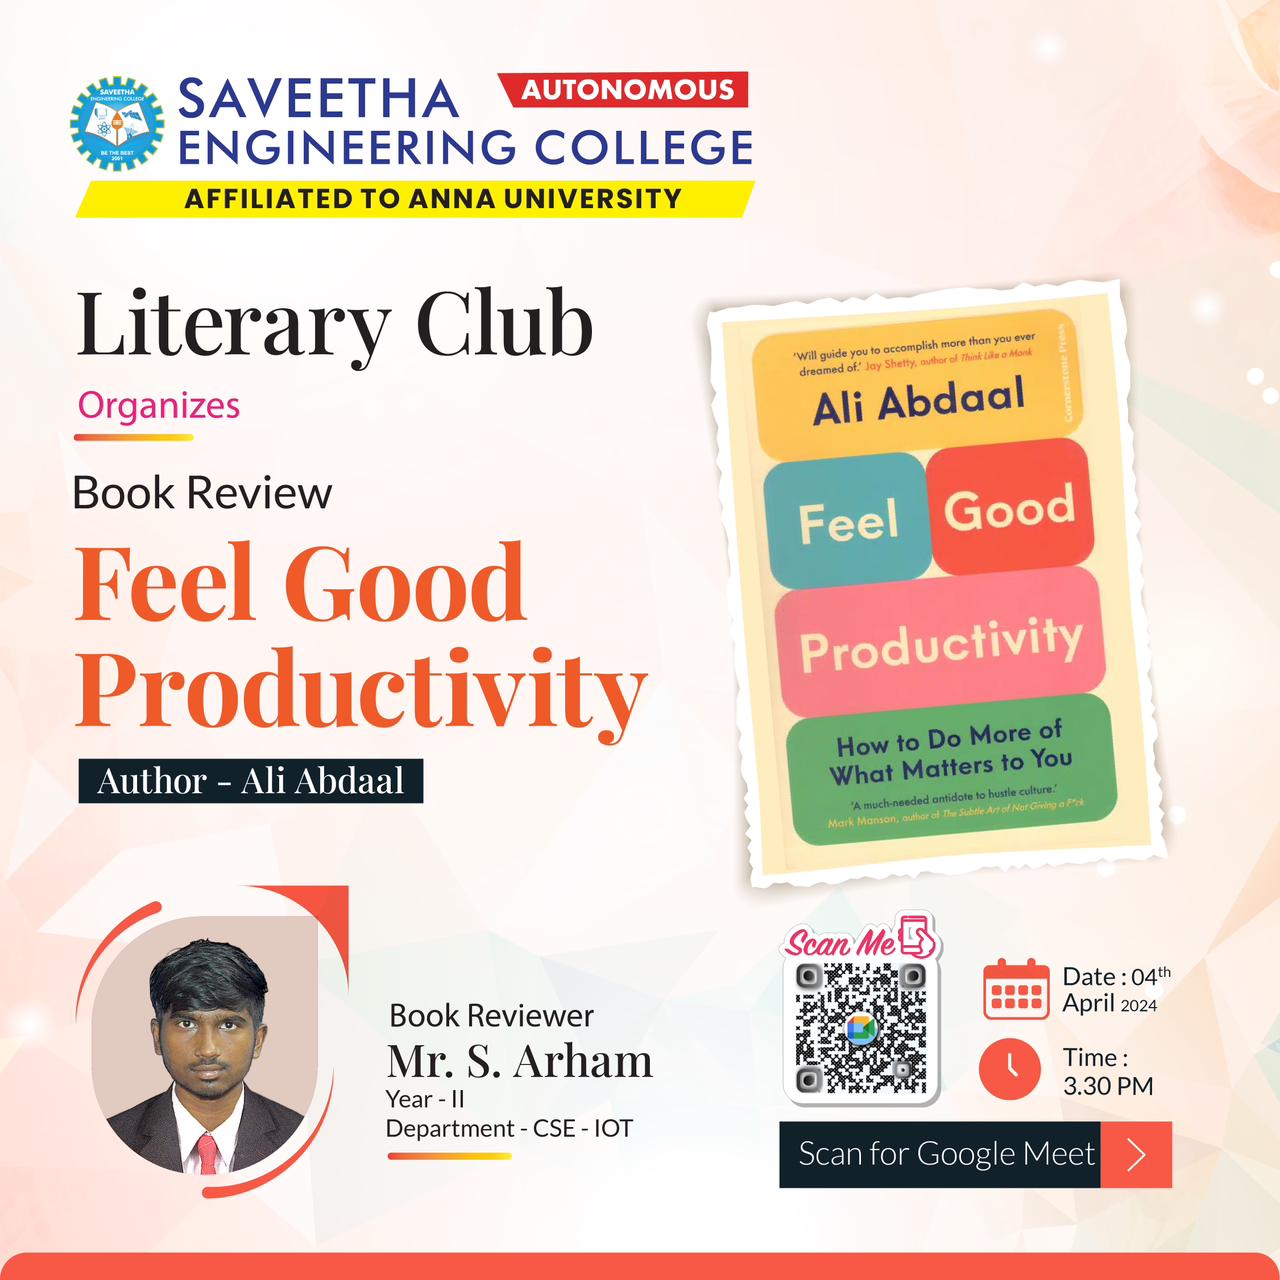 Literarty Club hosts Book Review